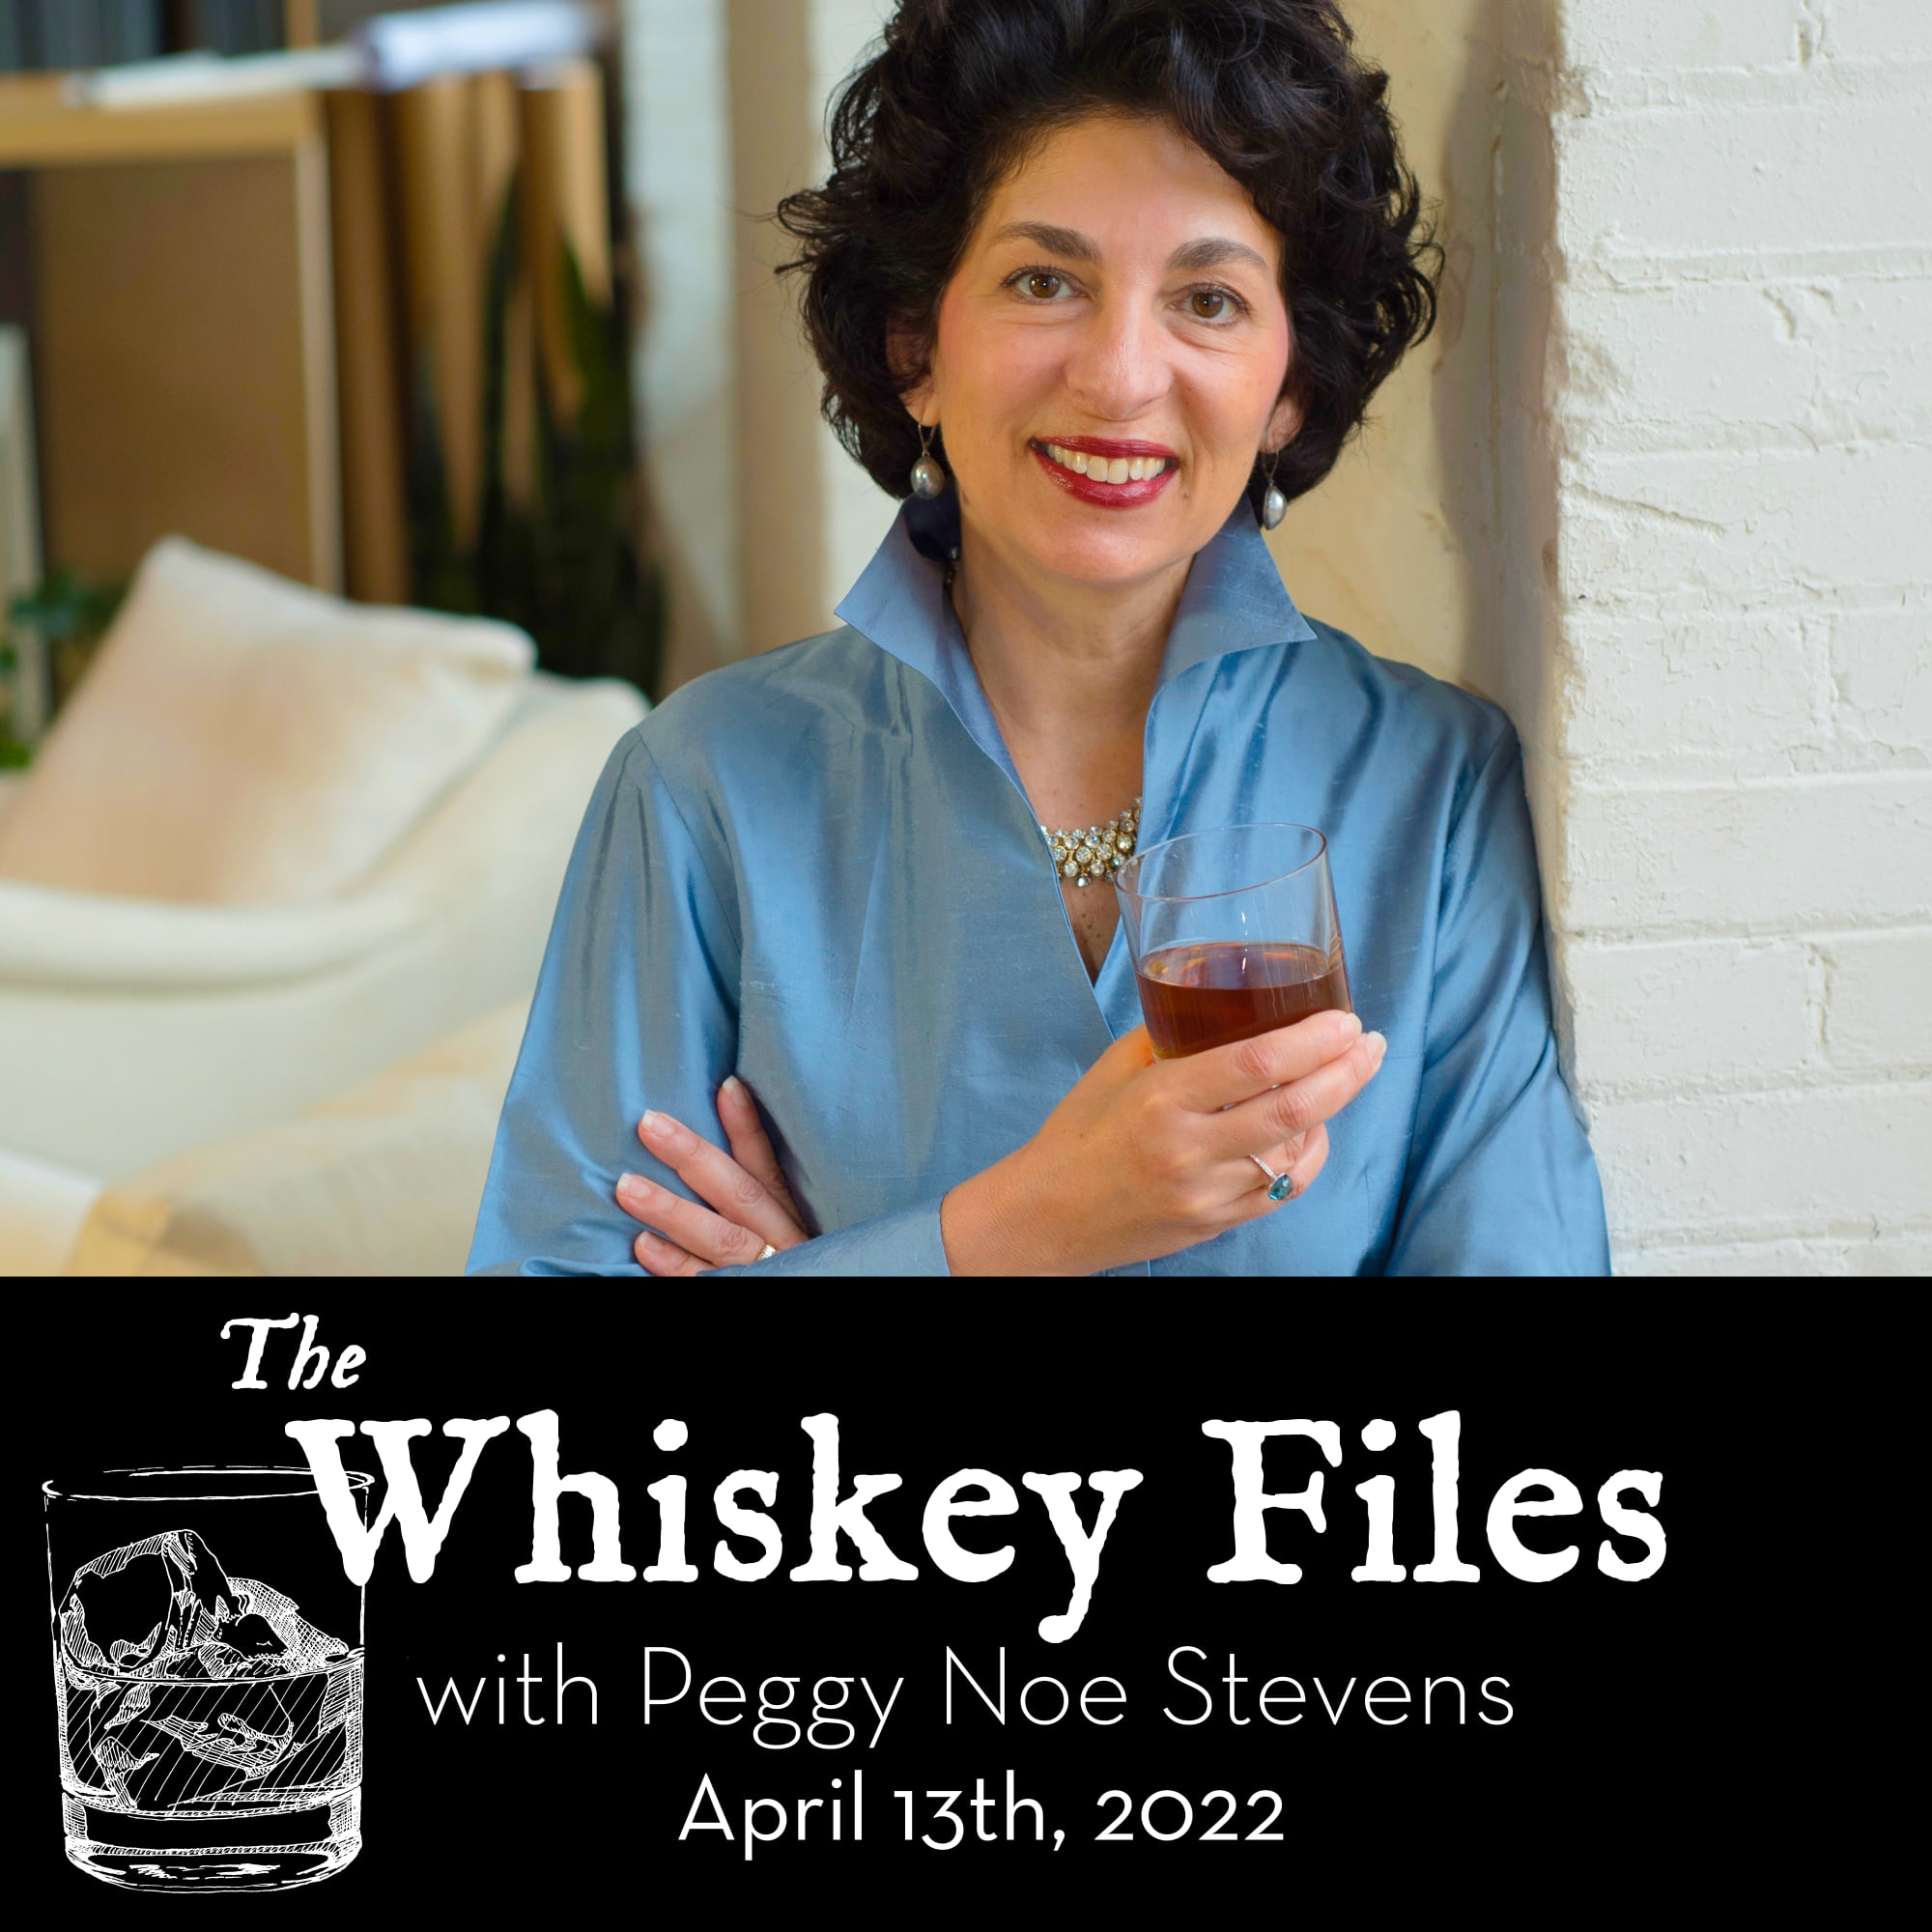 The Whiskey Files